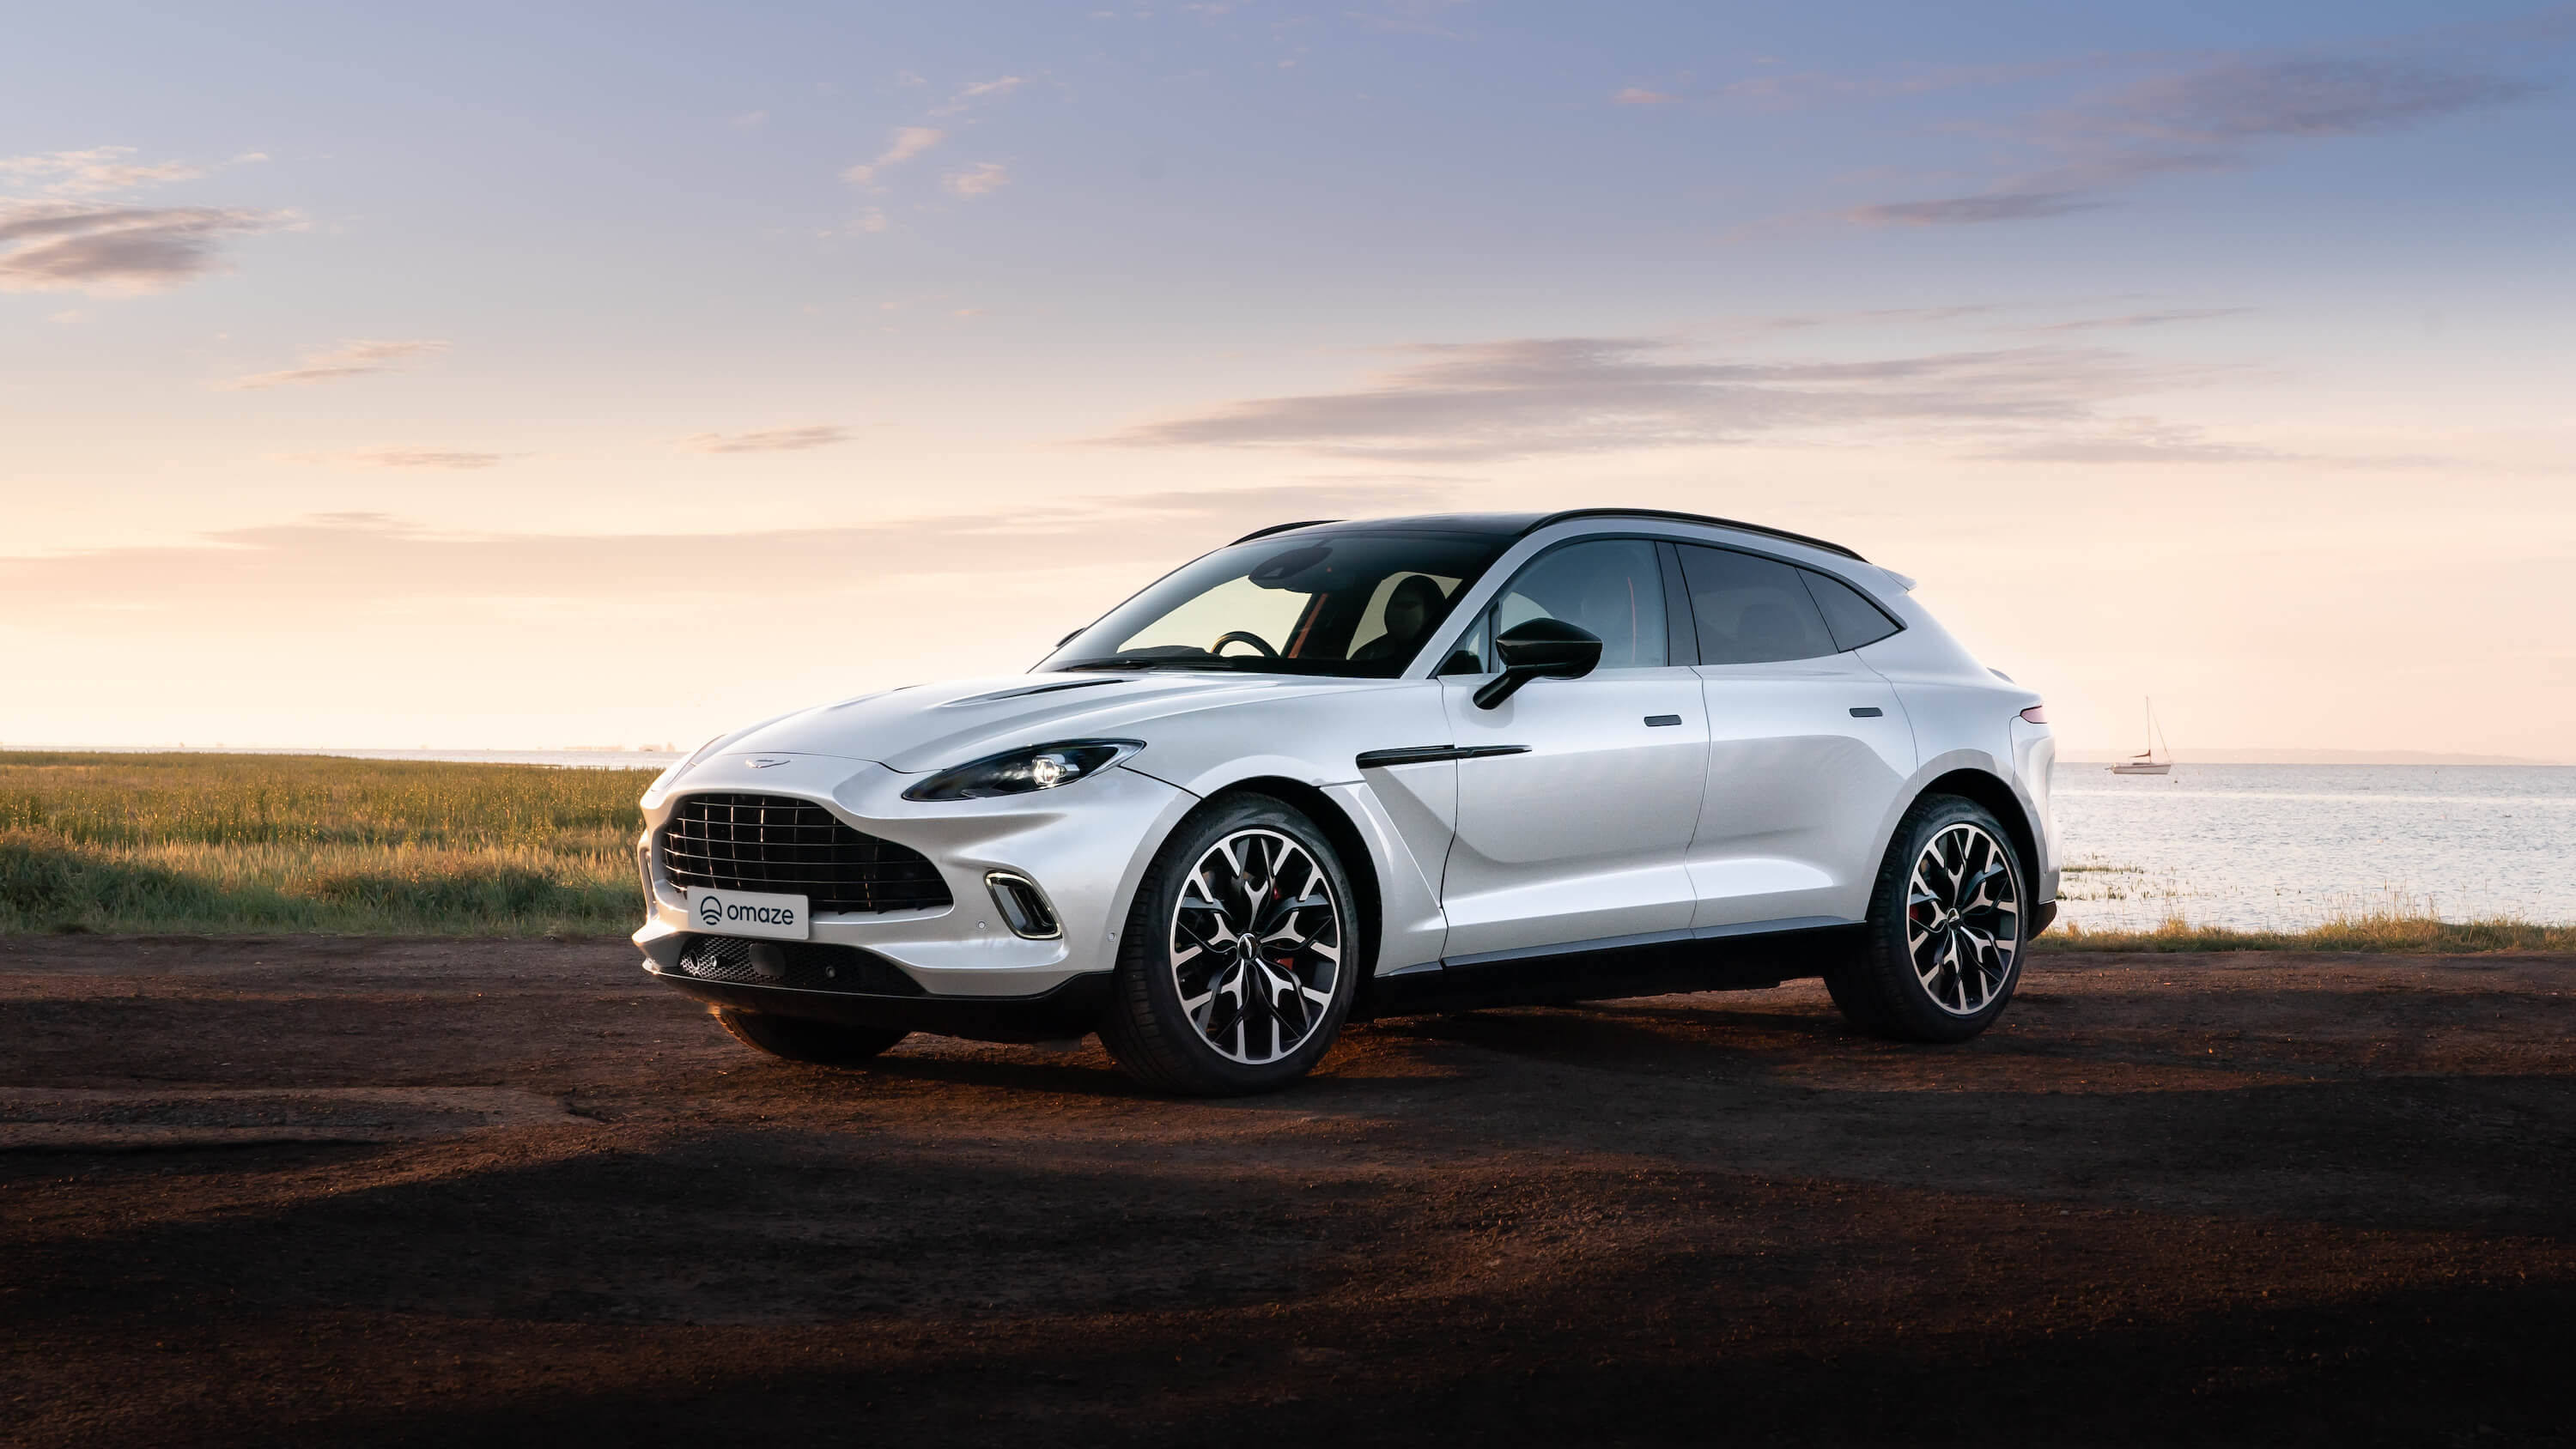 Check Out This Awesome <br>Aston Martin DBX